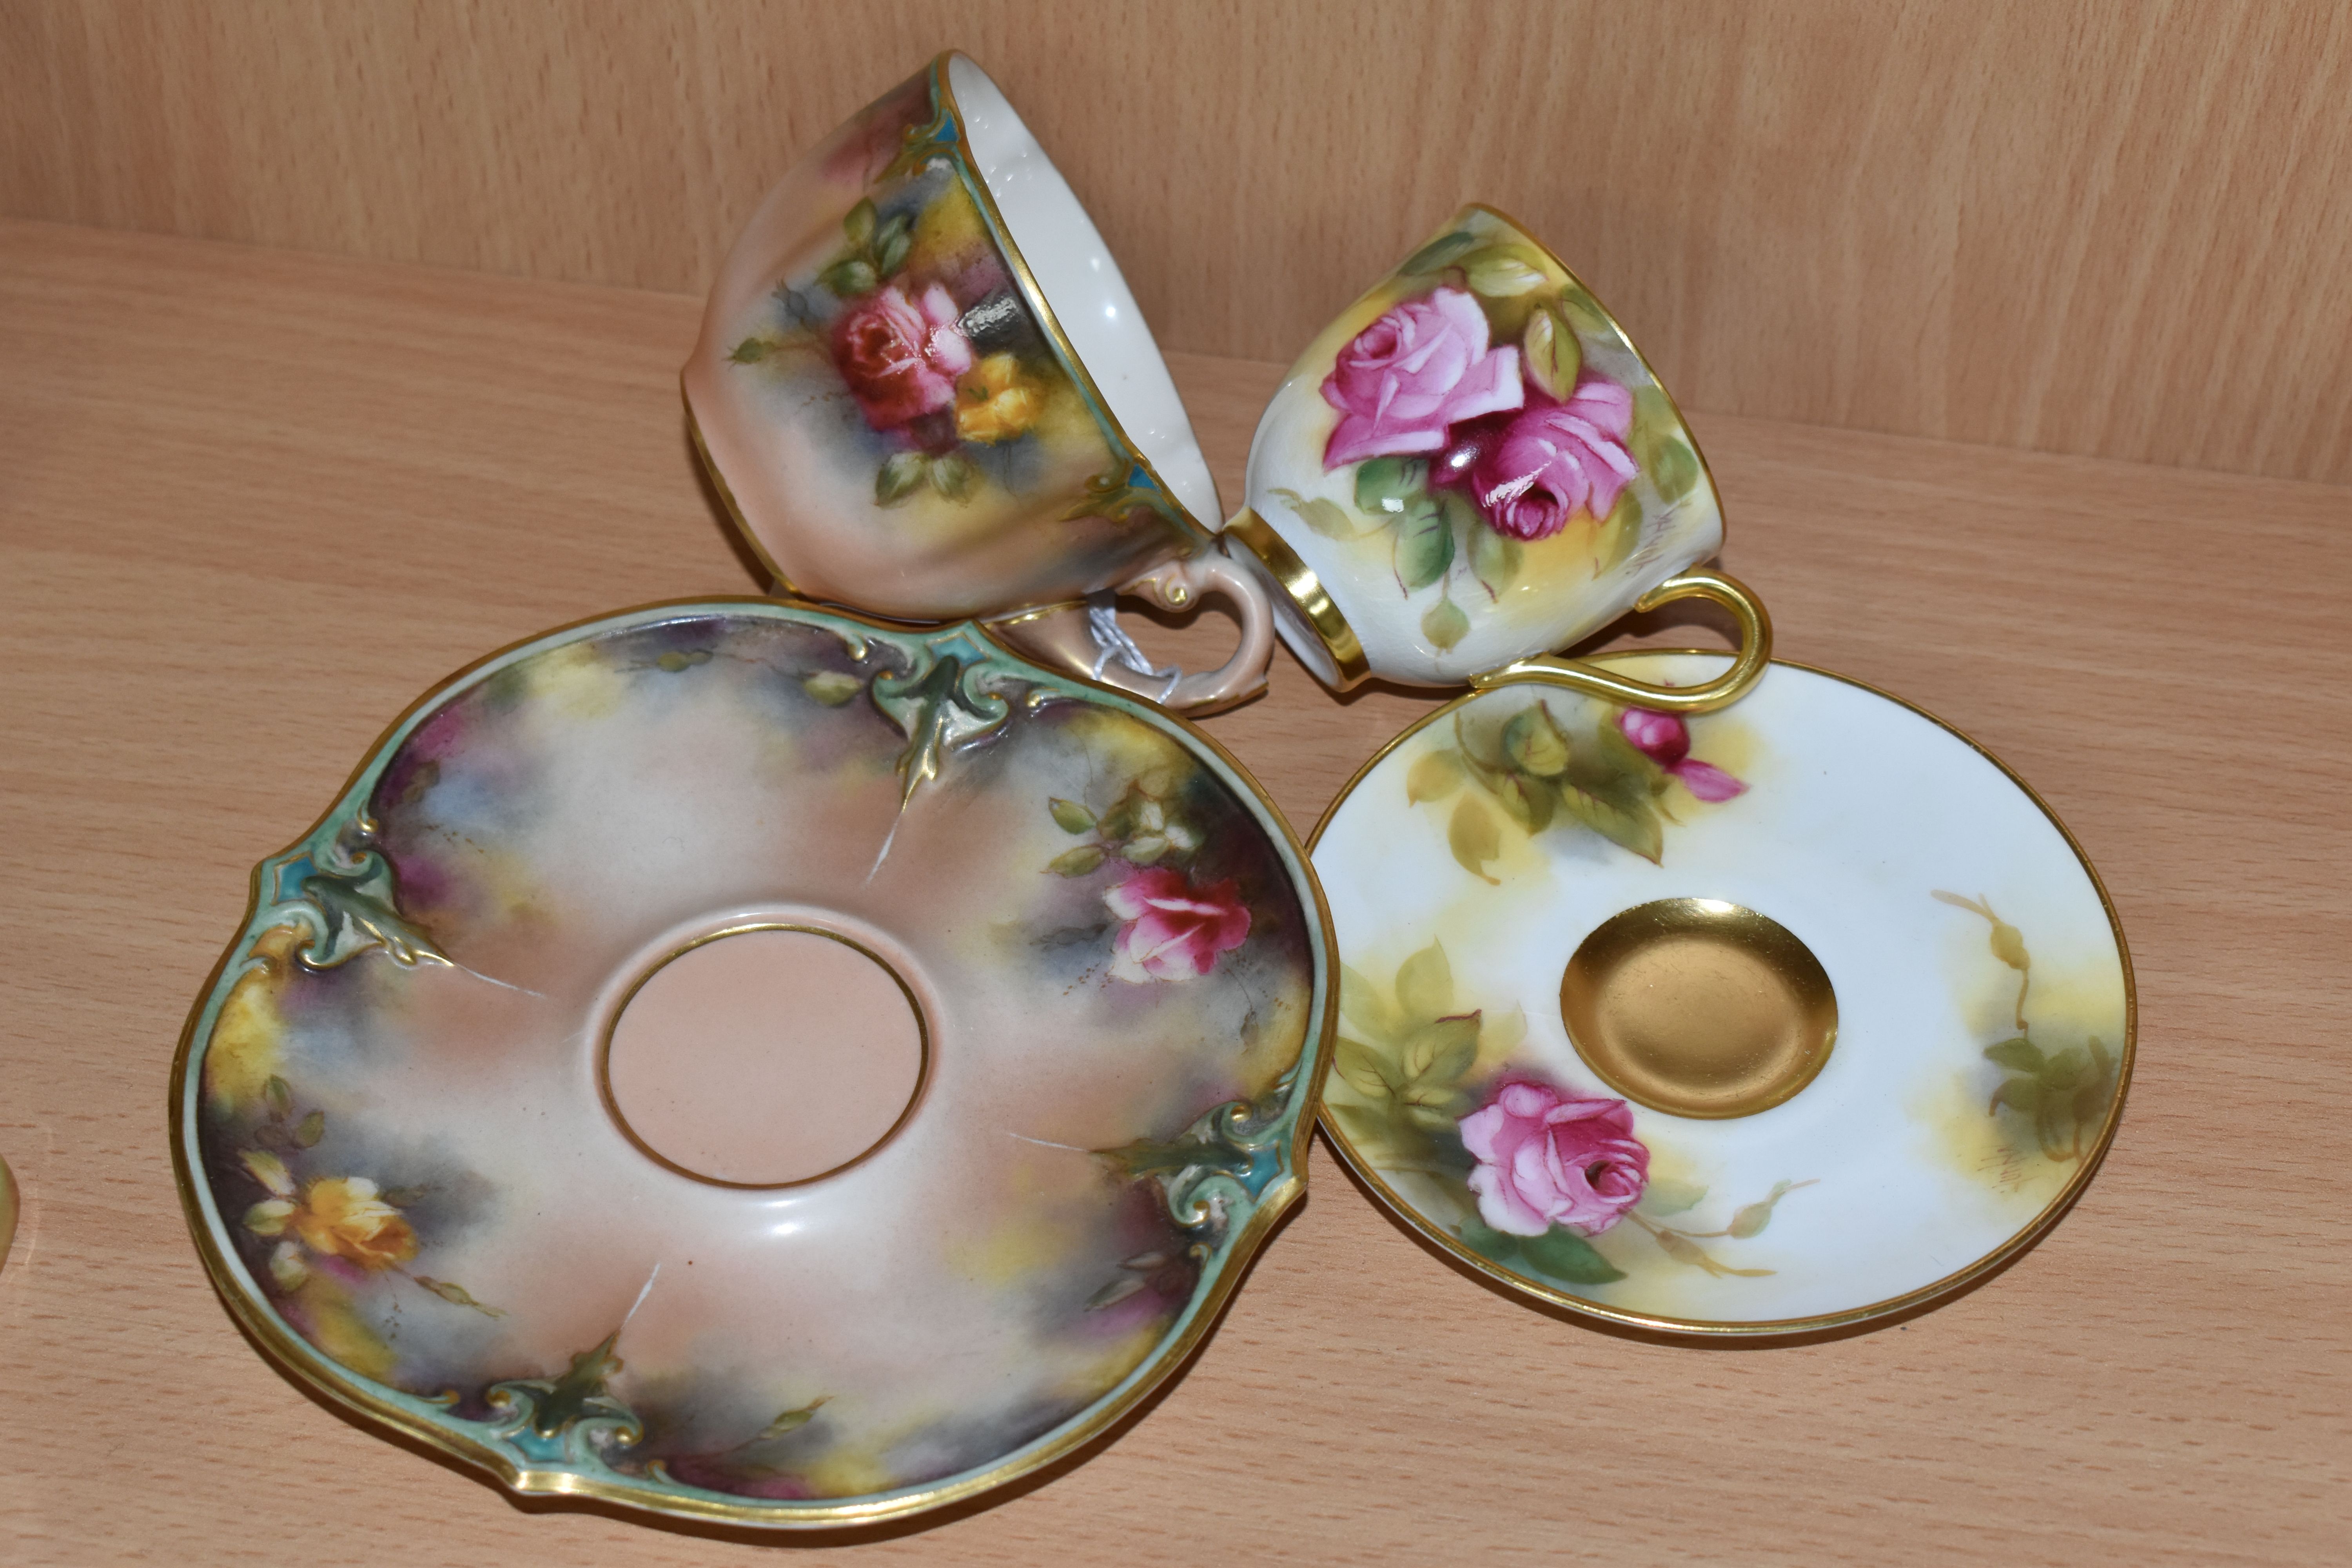 A ROYAL WORCESTER CABINET CUP AND SAUCER, WITH A JAMES HADLEY & SONS TEACUP AND SAUCER, comprising a - Image 6 of 7